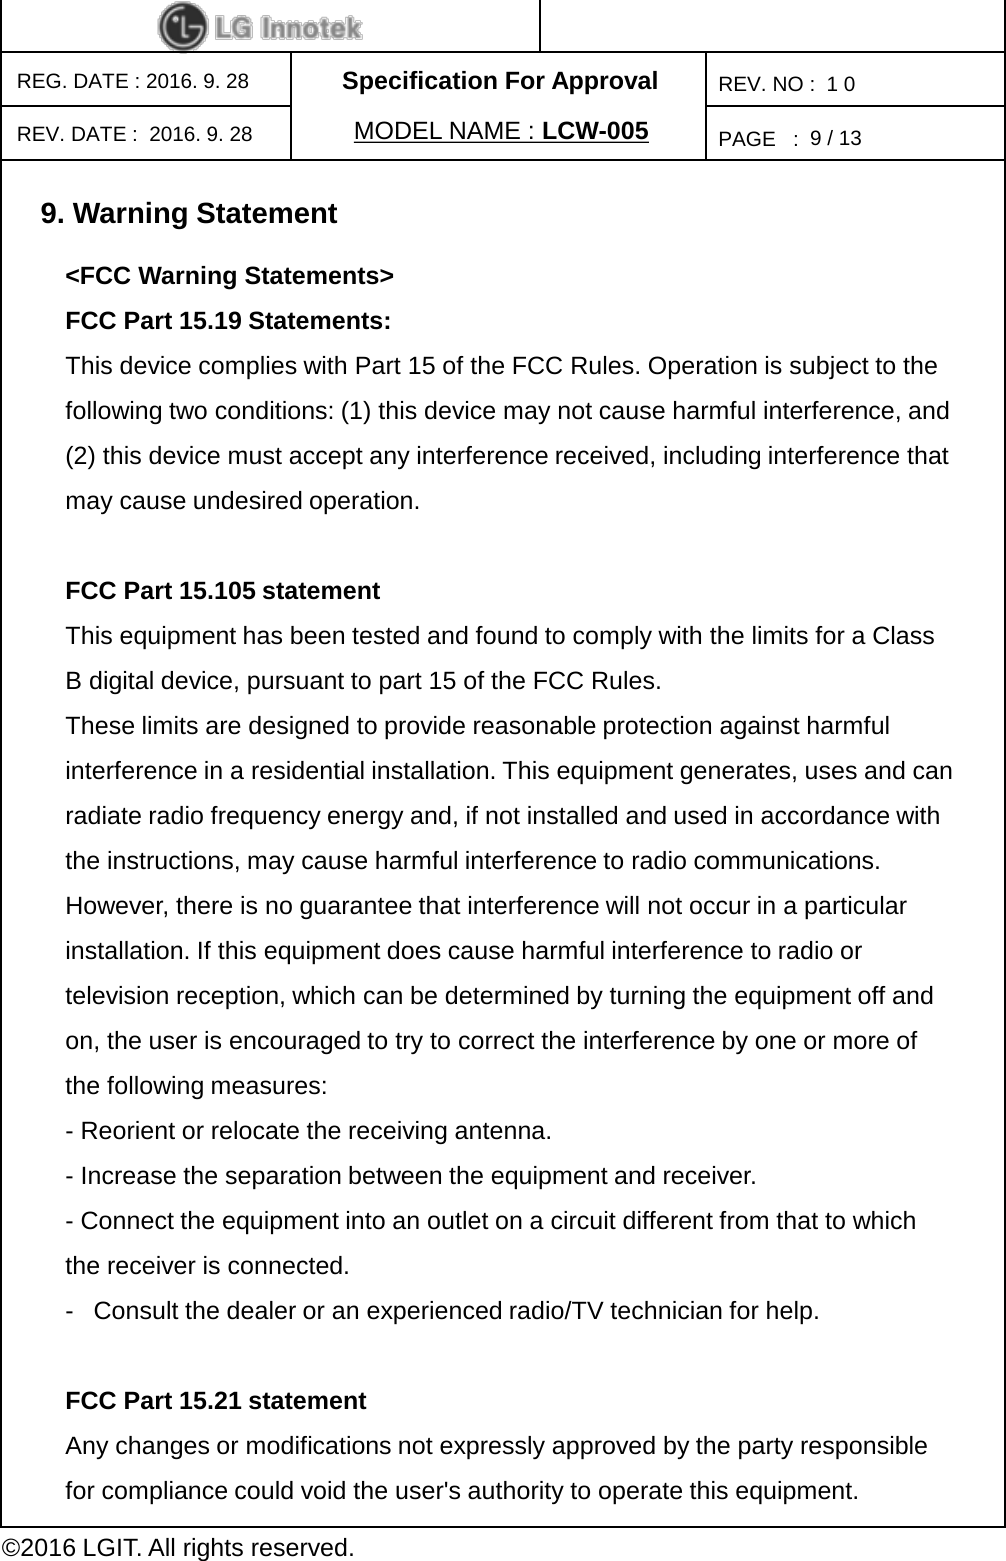 Specification For ApprovalPAGE   :REG. DATE : 2016. 9. 28MODEL NAME : LCW-005REV. NO :  1 0©2016 LGIT. All rights reserved.9/ 13REV. DATE :  2016. 9. 289. Warning Statement&lt;FCC Warning Statements&gt; FCC Part 15.19 Statements: This device complies with Part 15 of the FCC Rules. Operation is subject to the following two conditions: (1) this device may not cause harmful interference, and (2) this device must accept any interference received, including interference that may cause undesired operation. FCC Part 15.105 statement This equipment has been tested and found to comply with the limits for a Class B digital device, pursuant to part 15 of the FCC Rules. These limits are designed to provide reasonable protection against harmful interference in a residential installation. This equipment generates, uses and can radiate radio frequency energy and, if not installed and used in accordance with the instructions, may cause harmful interference to radio communications. However, there is no guarantee that interference will not occur in a particular installation. If this equipment does cause harmful interference to radio or television reception, which can be determined by turning the equipment off and on, the user is encouraged to try to correct the interference by one or more of the following measures: -Reorient or relocate the receiving antenna. -Increase the separation between the equipment and receiver. -Connect the equipment into an outlet on a circuit different from that to which the receiver is connected. -Consult the dealer or an experienced radio/TV technician for help. FCC Part 15.21 statement Any changes or modifications not expressly approved by the party responsible for compliance could void the user&apos;s authority to operate this equipment. 